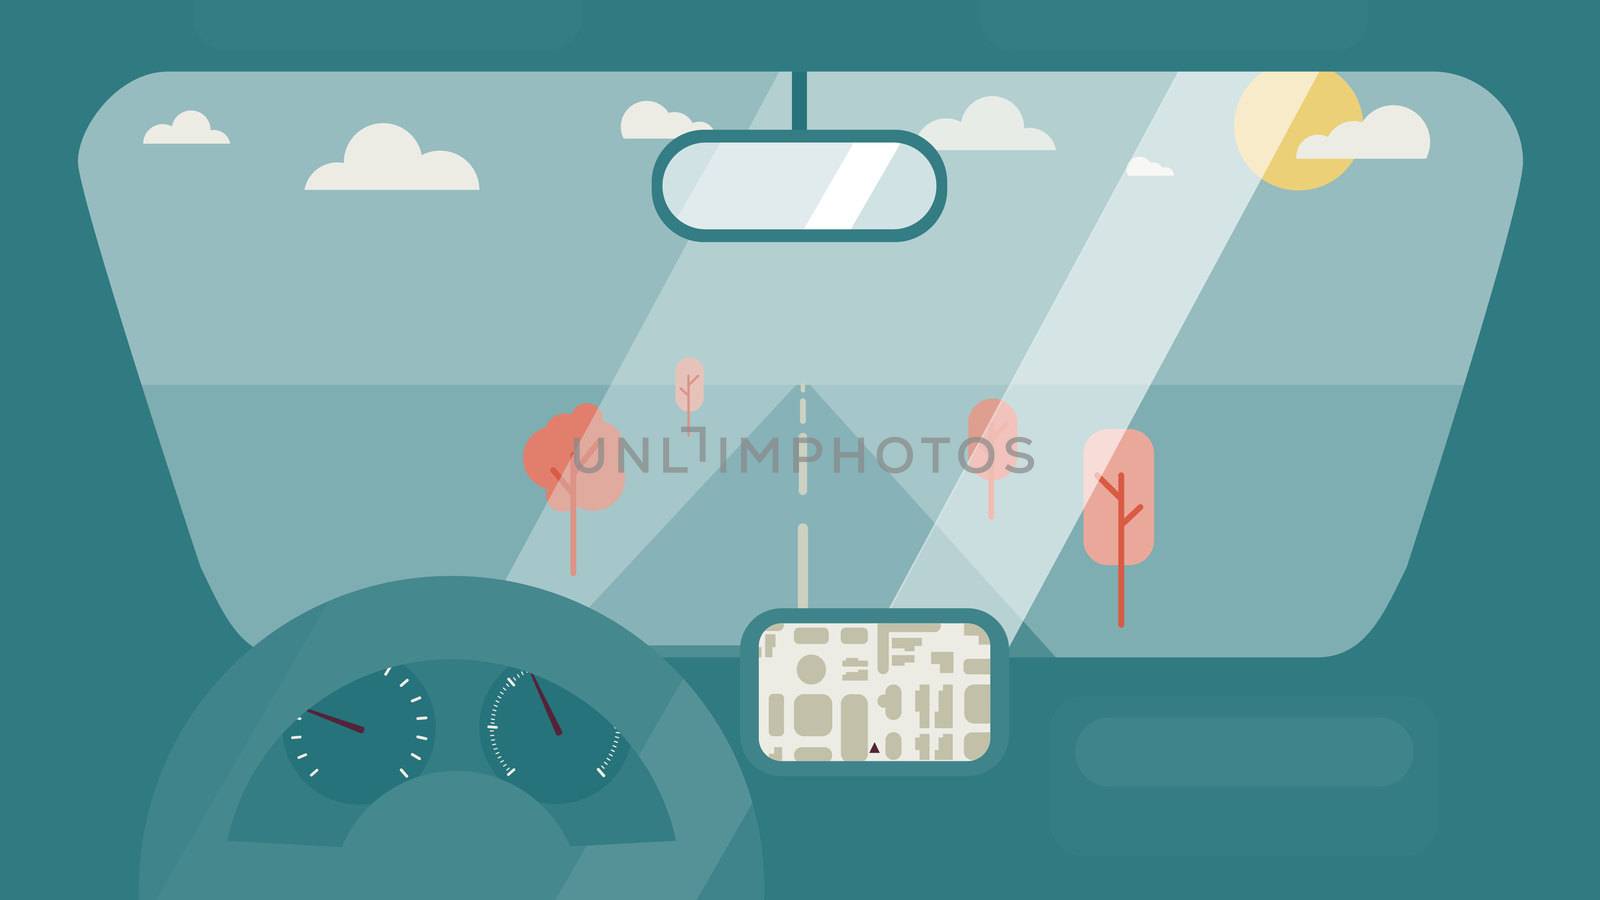 Inside car interior with wheel, speedometer, gps navigator. Vehicle background with view of road in window. Vector